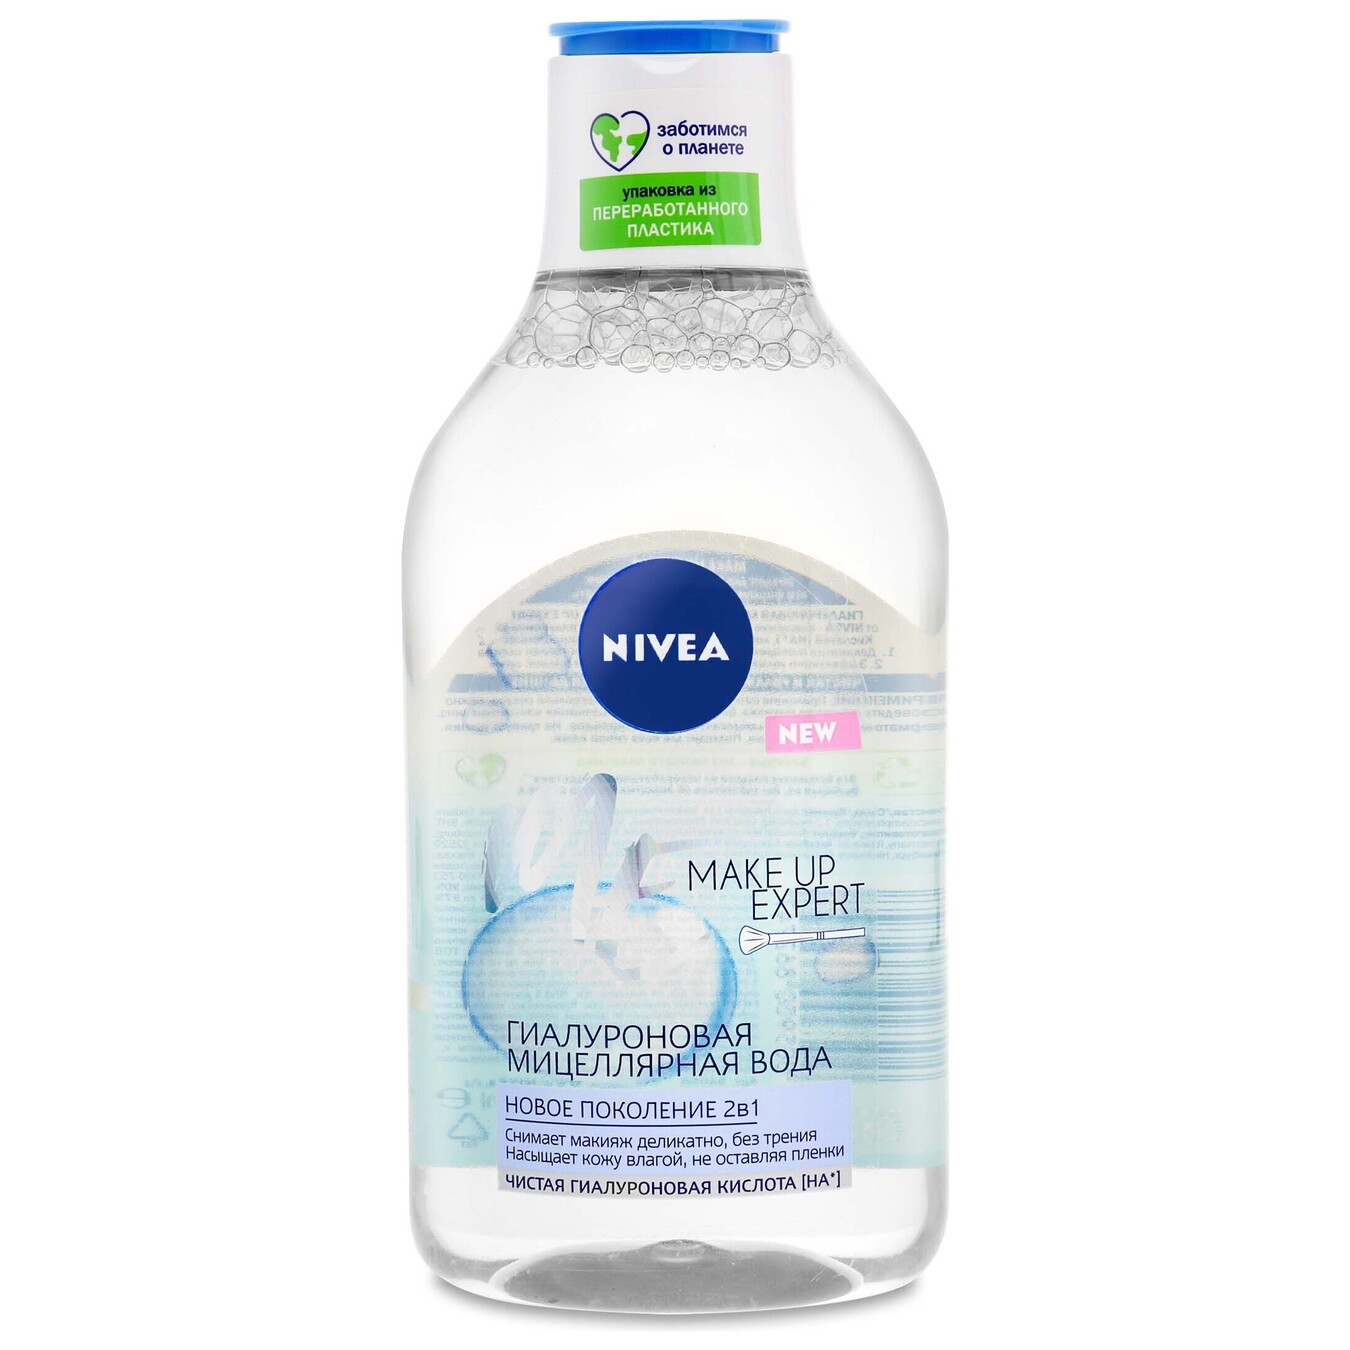 Hyaluronic micellar water MAKE UP EXPERT from Nivea 400 ml